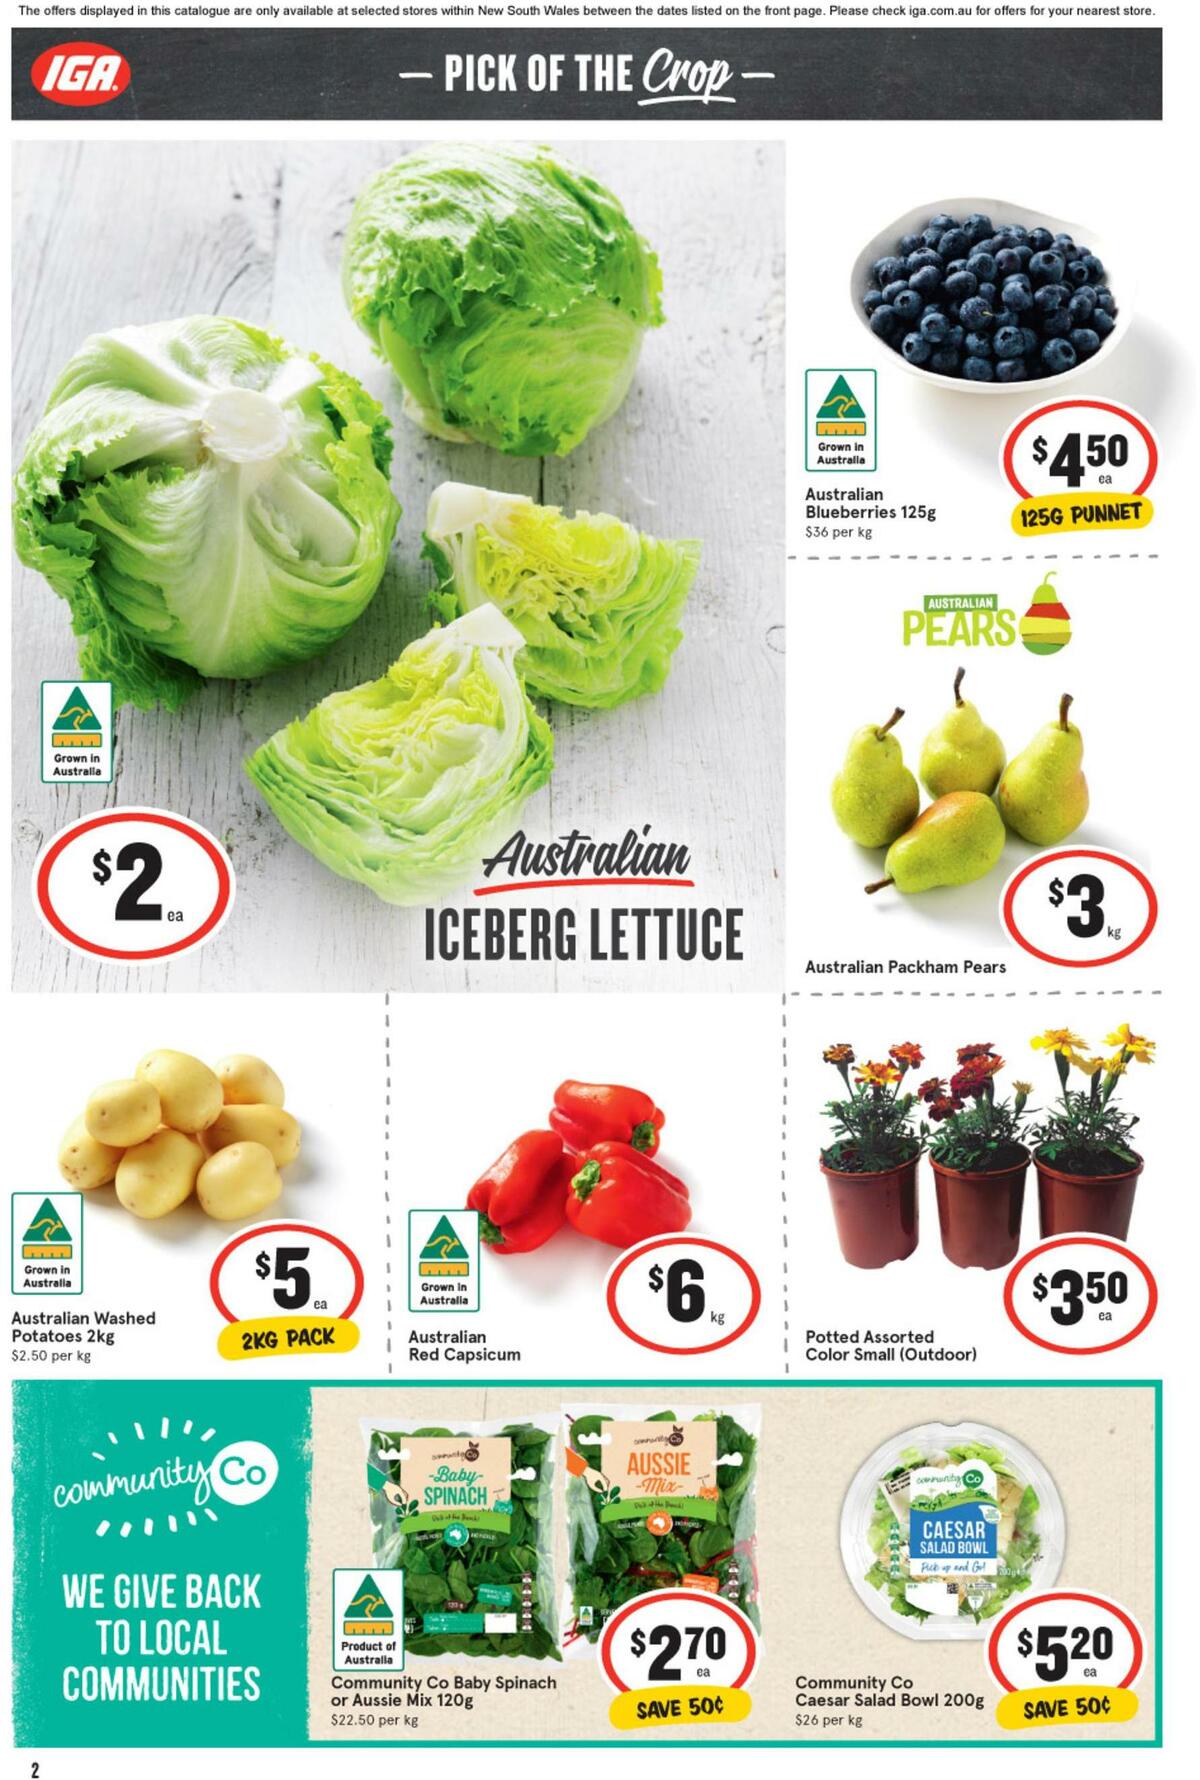 IGA Catalogues from 7 September